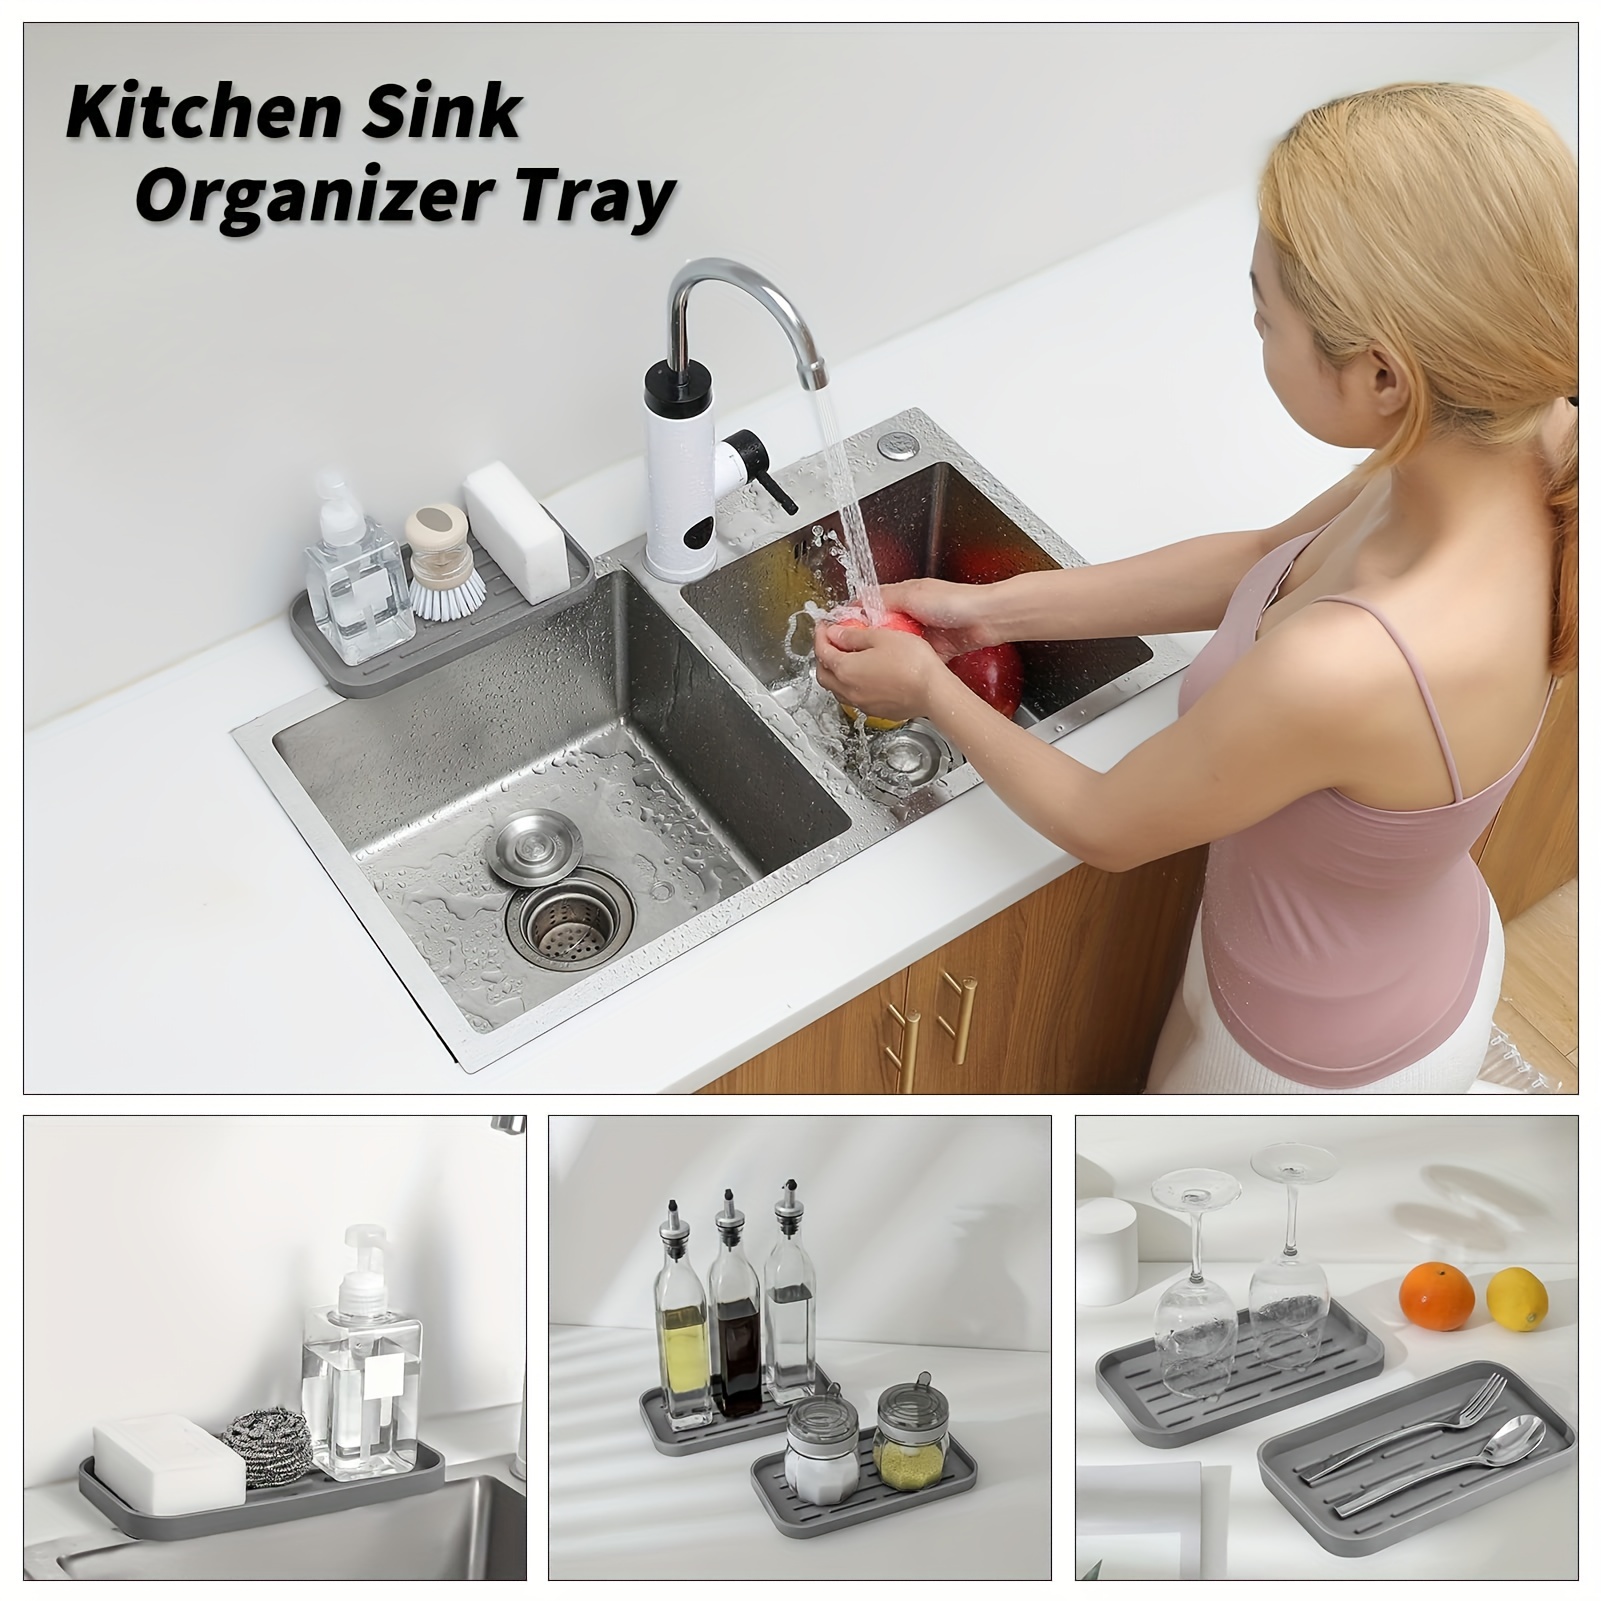 Silicone Kitchen Sink Organizer Tray for Multiple Usage Dish Soap